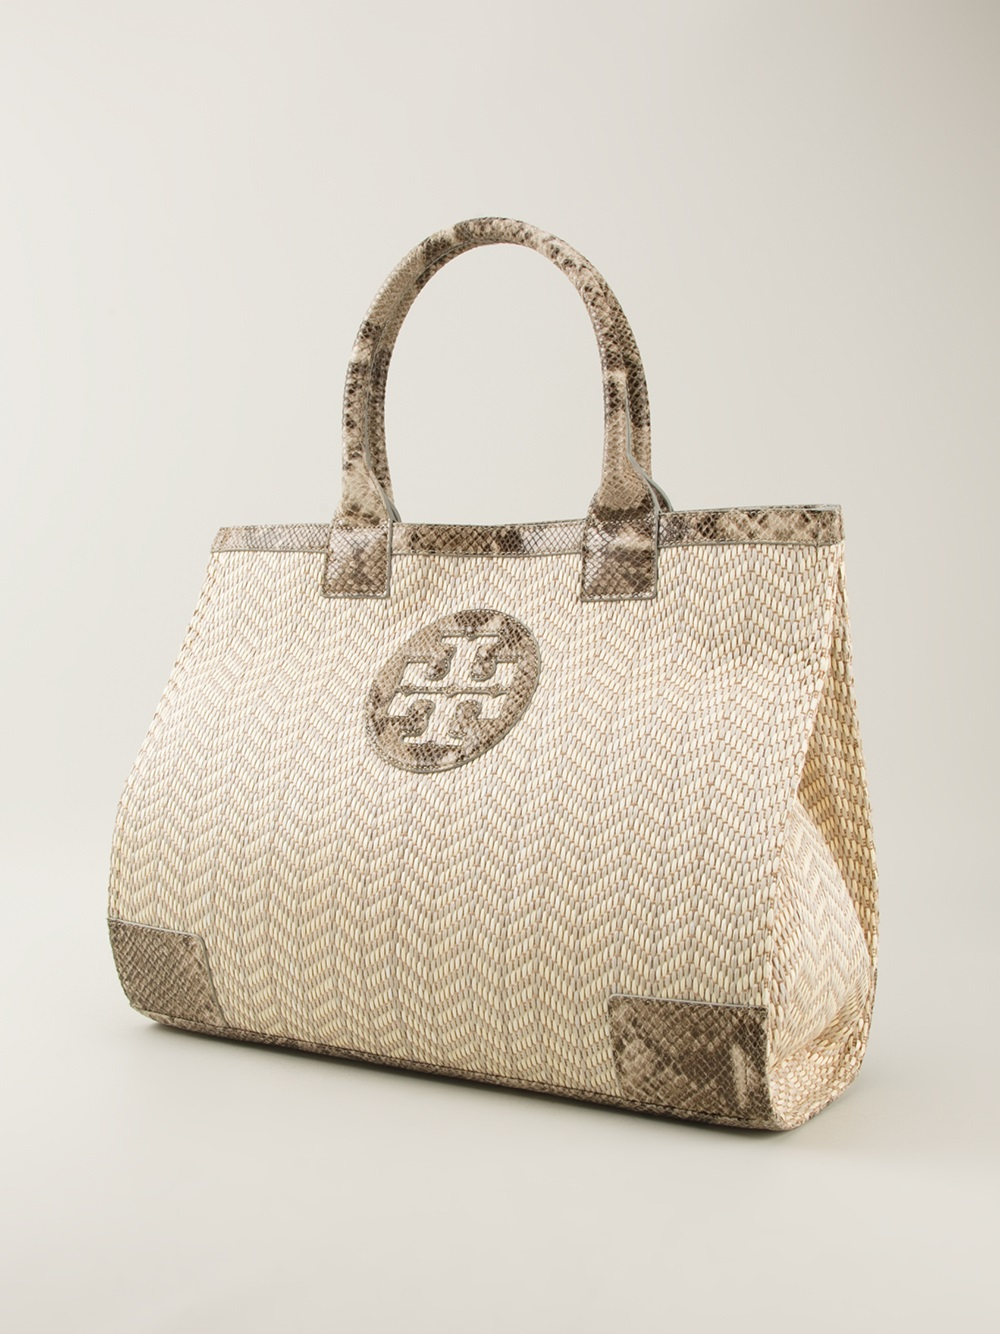 Tory Burch Ella Snake-Effect Leather-Trimmed Raffia Tote in Natural | Lyst